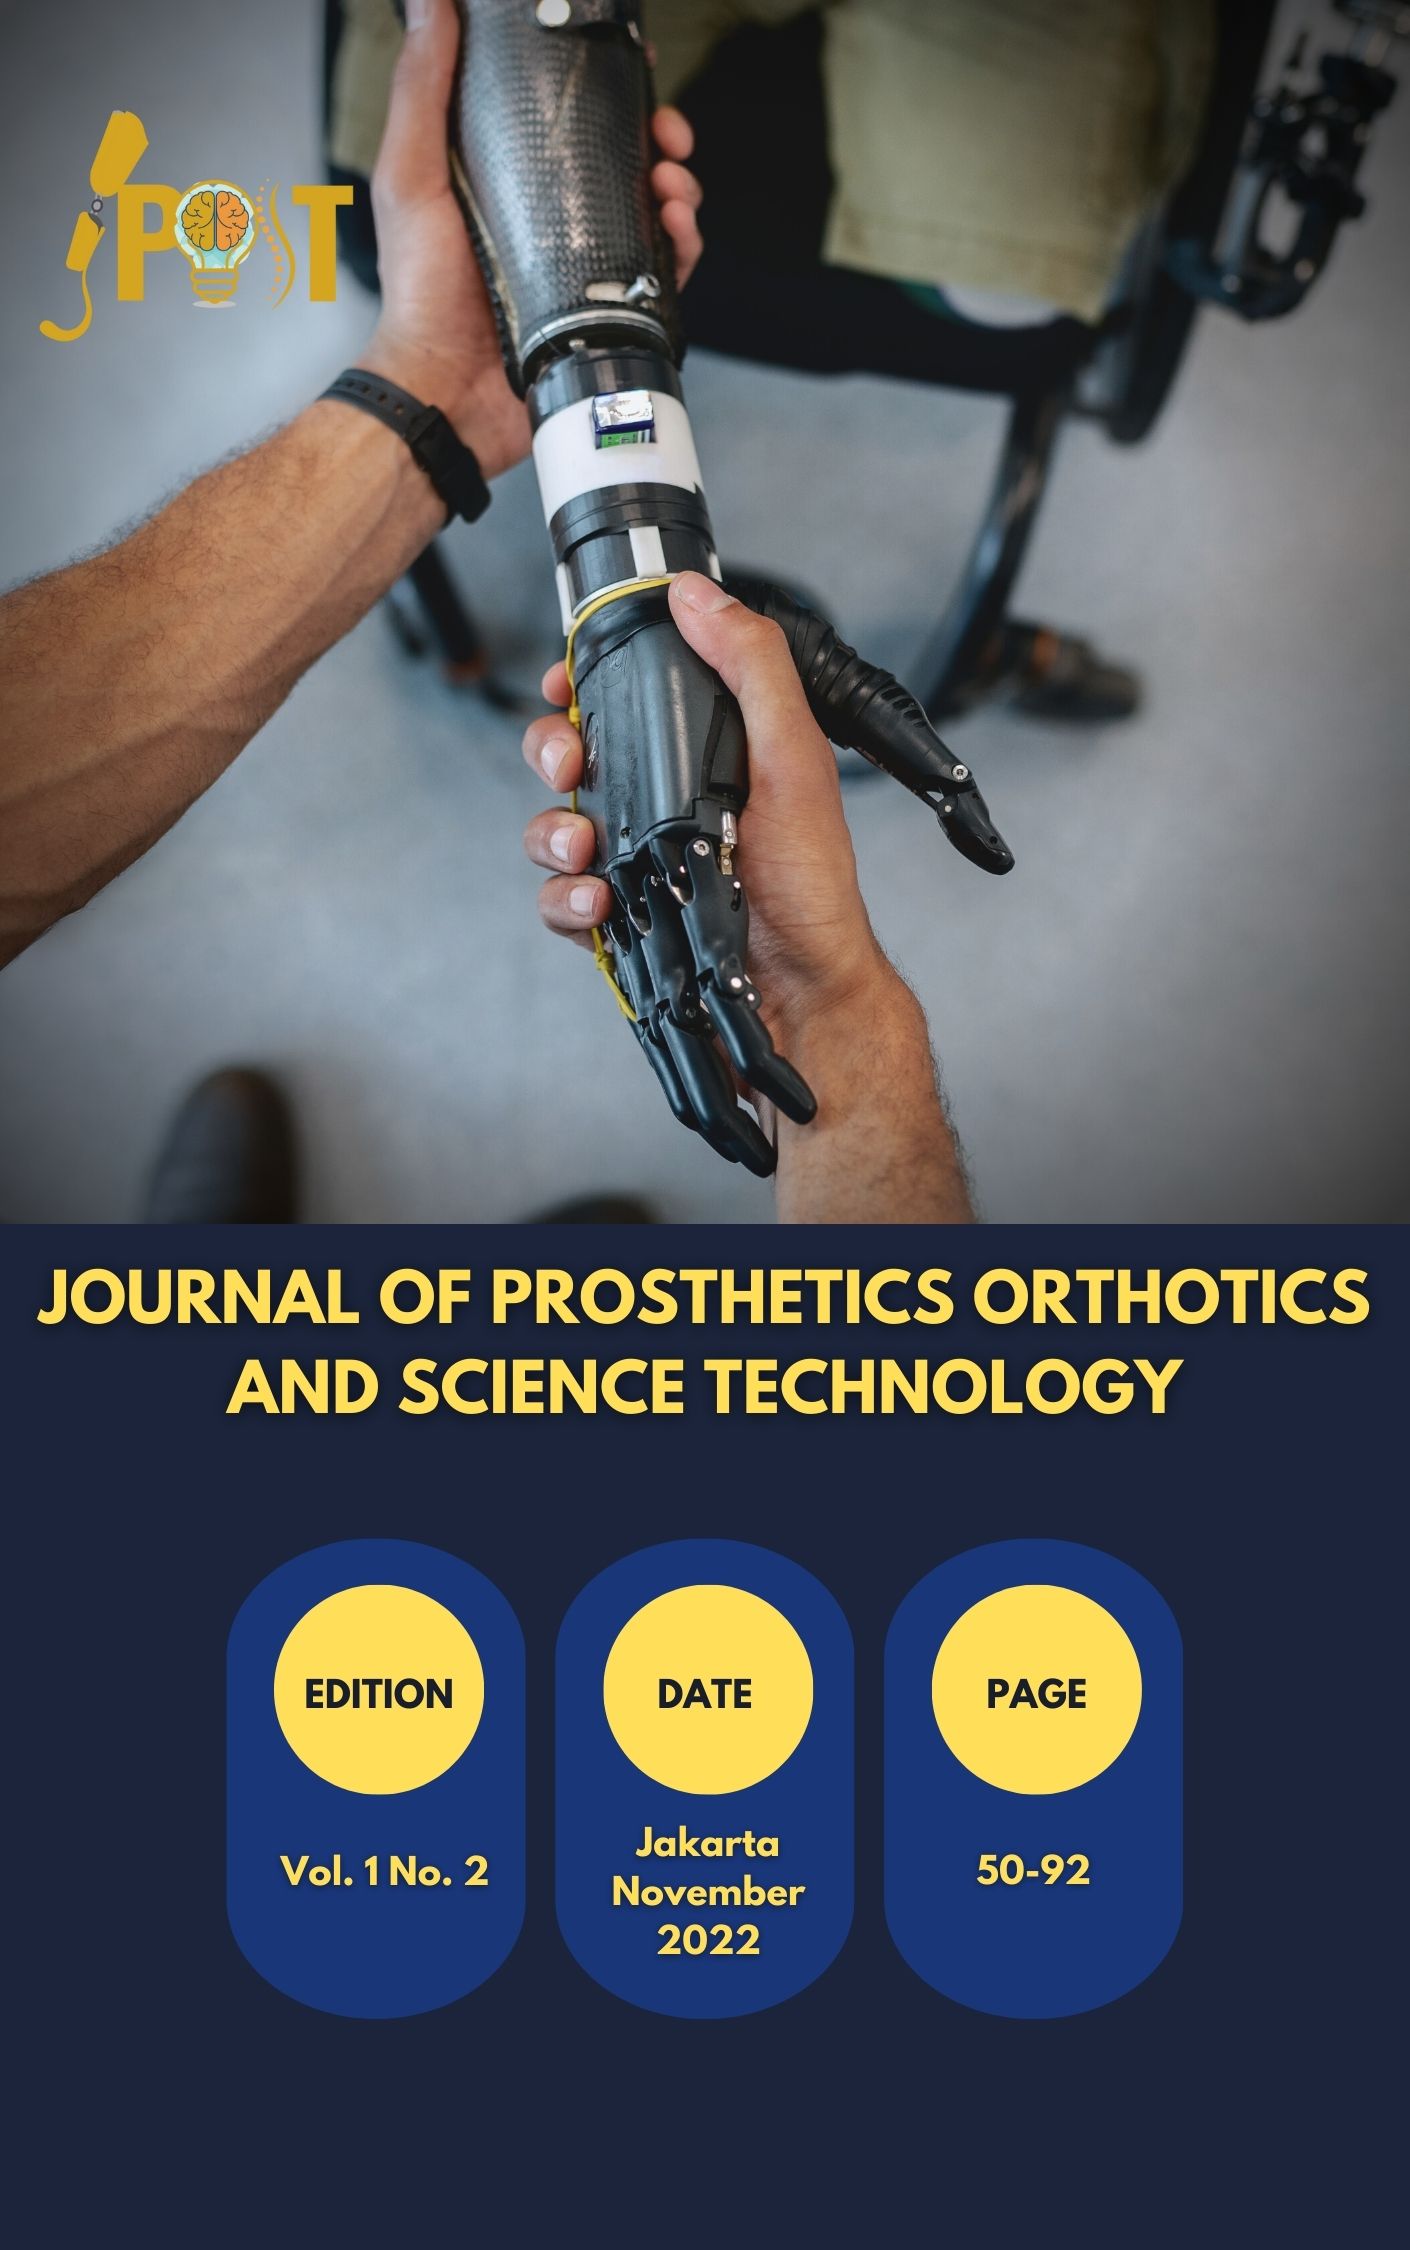 					View Vol. 1 No. 2 (2022): JPOST: JOURNAL OF PROSTHETICS ORTHOTICS AND SCIENCE TECHNOLOGY
				